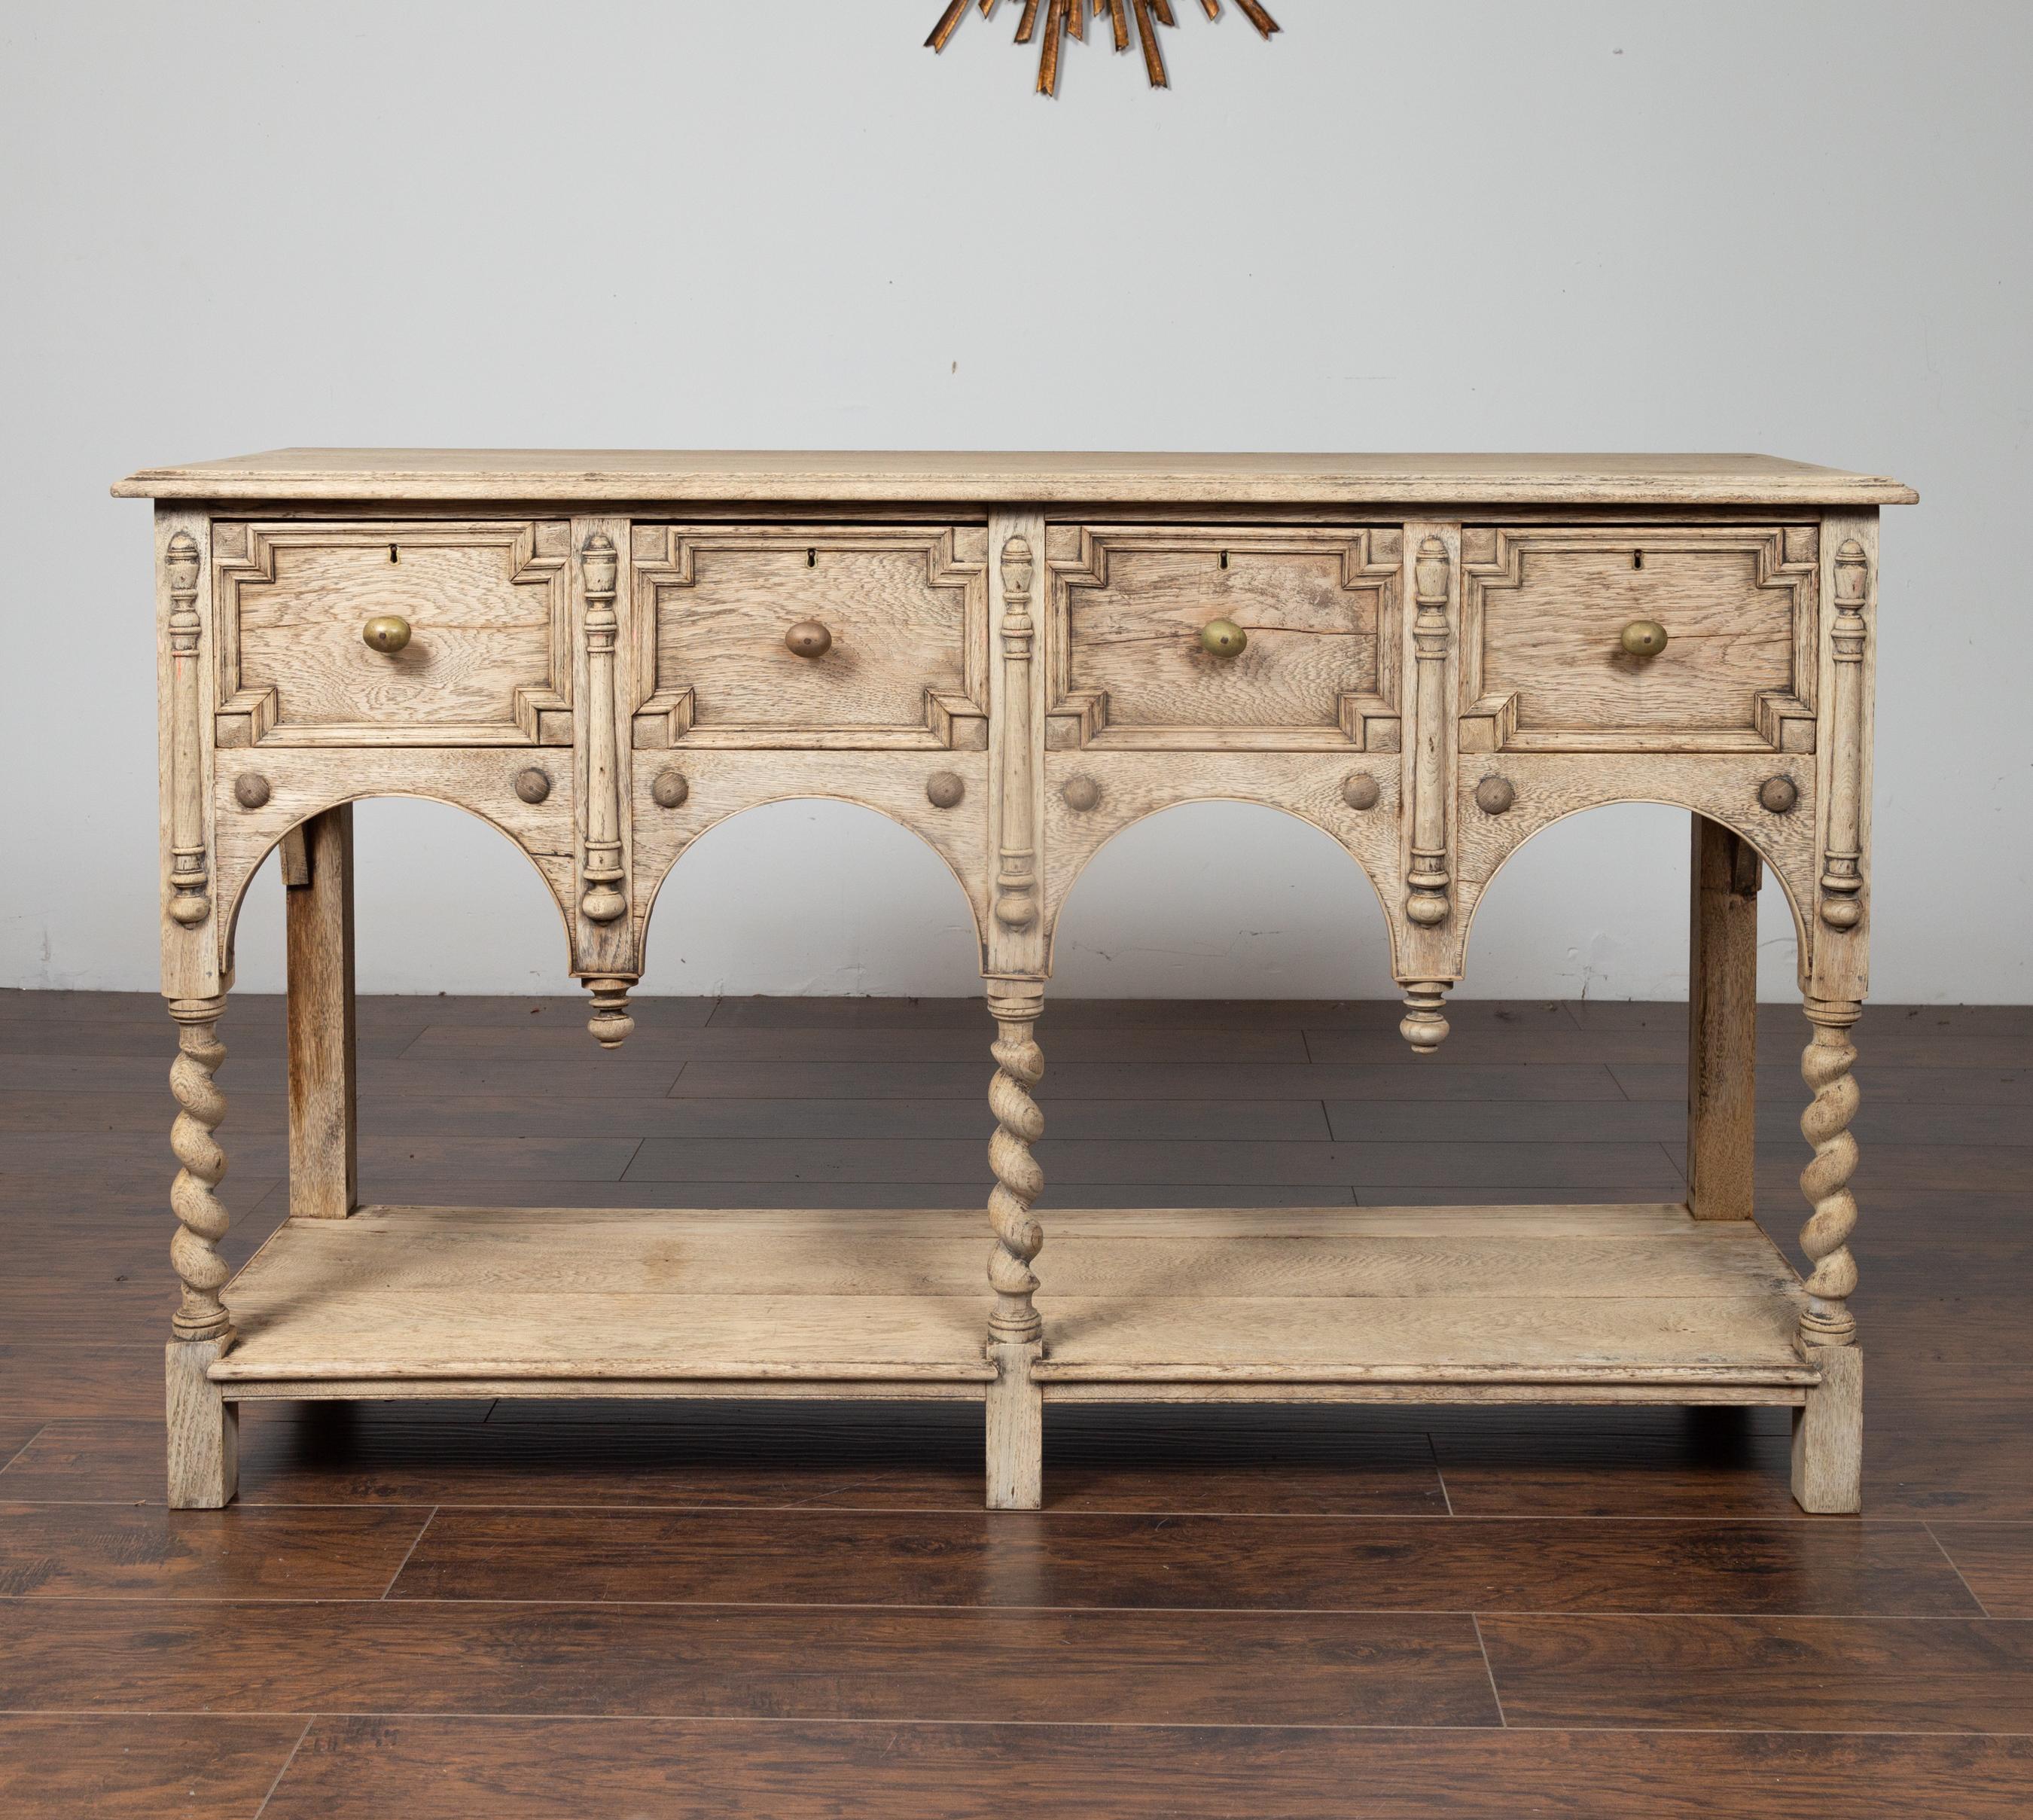 This exquisite English late 19th century bleached server features a rectangular top with beveled edge over four geometric drawers with brass pulls. The graceful Renaissance inspiration is noticeable in the facade. The server is indeed supported by